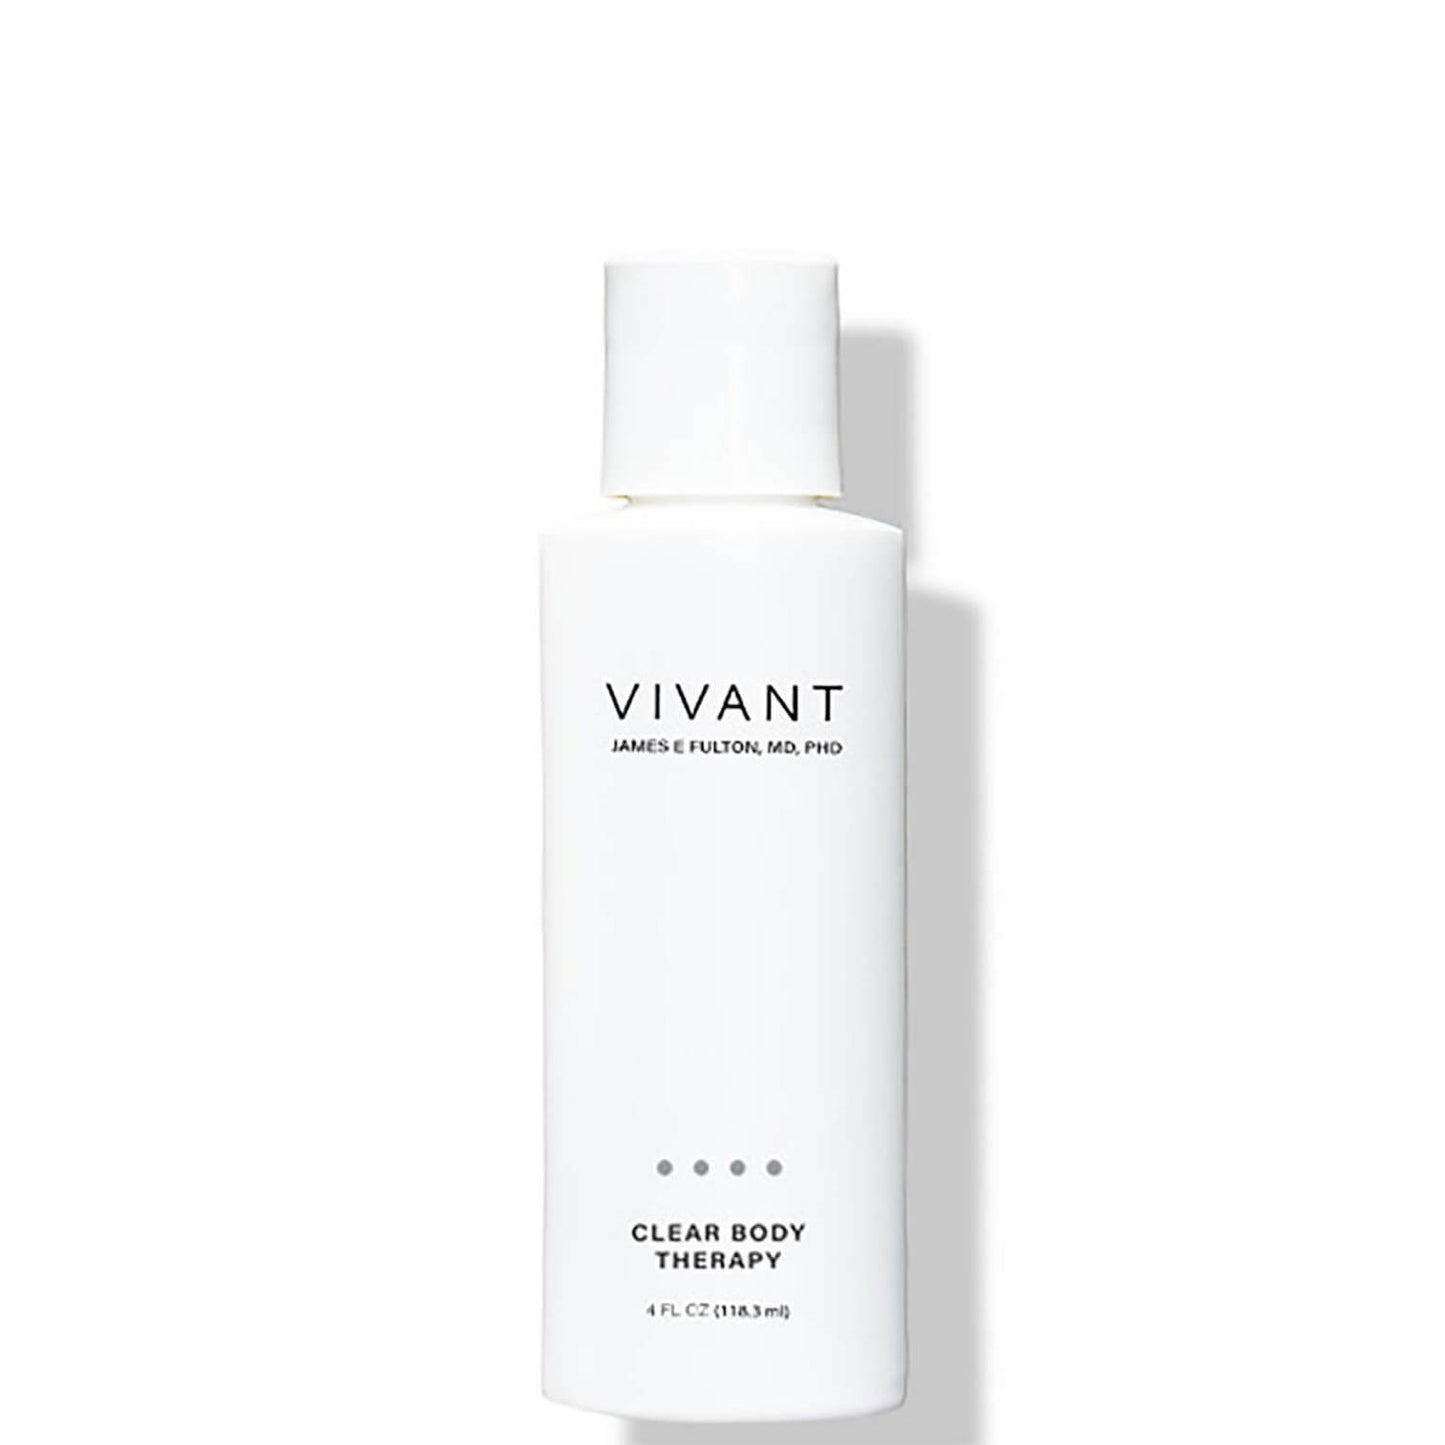 Vivant Clear Body Therapy